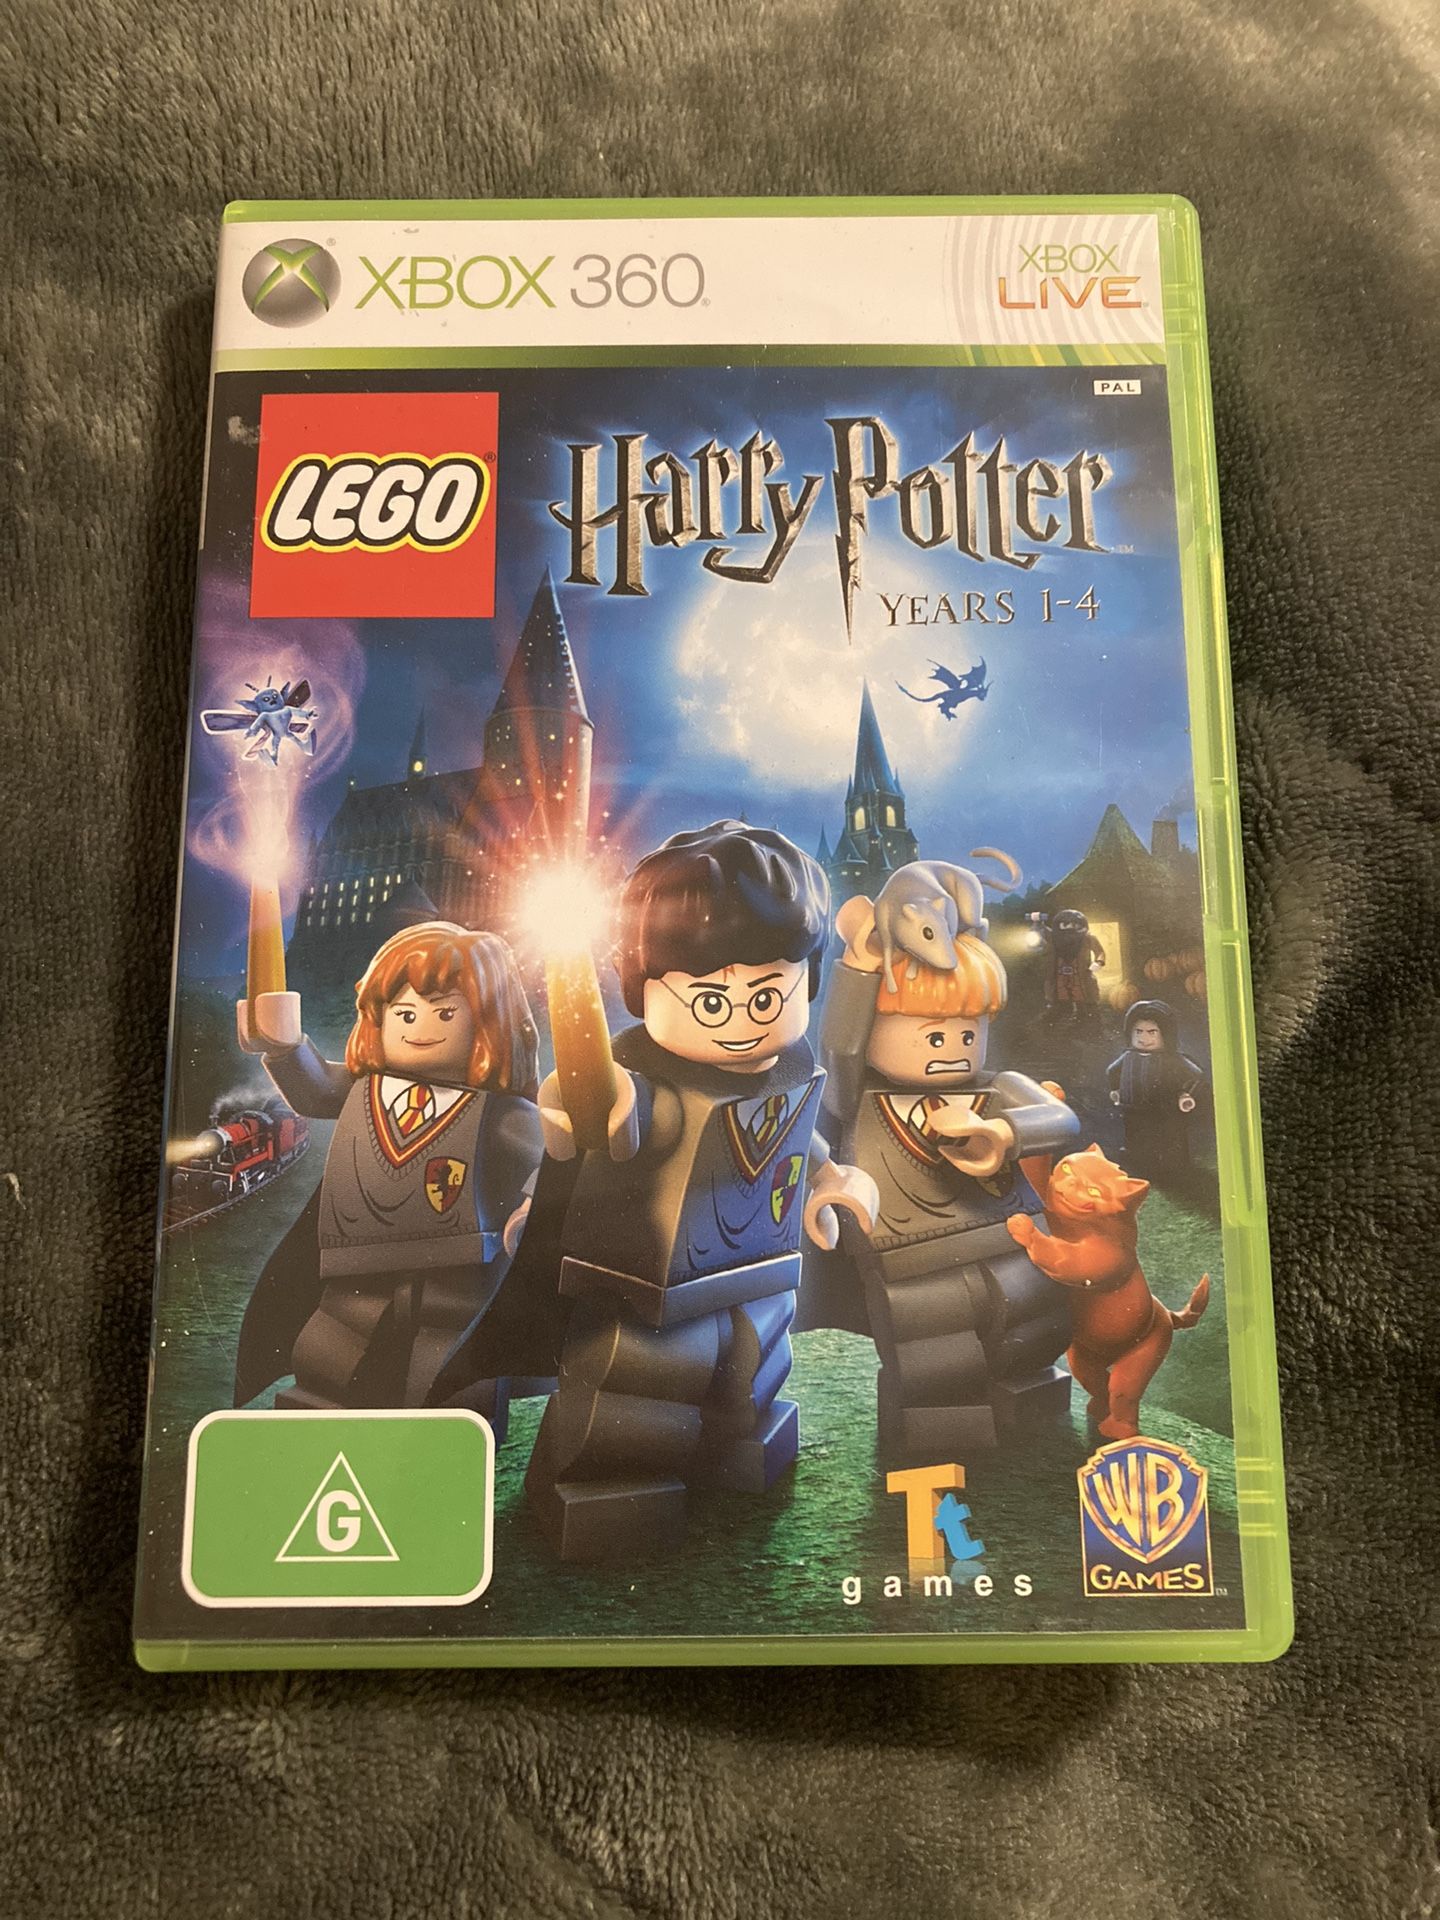 Lego Harry Potter For Xbox 360